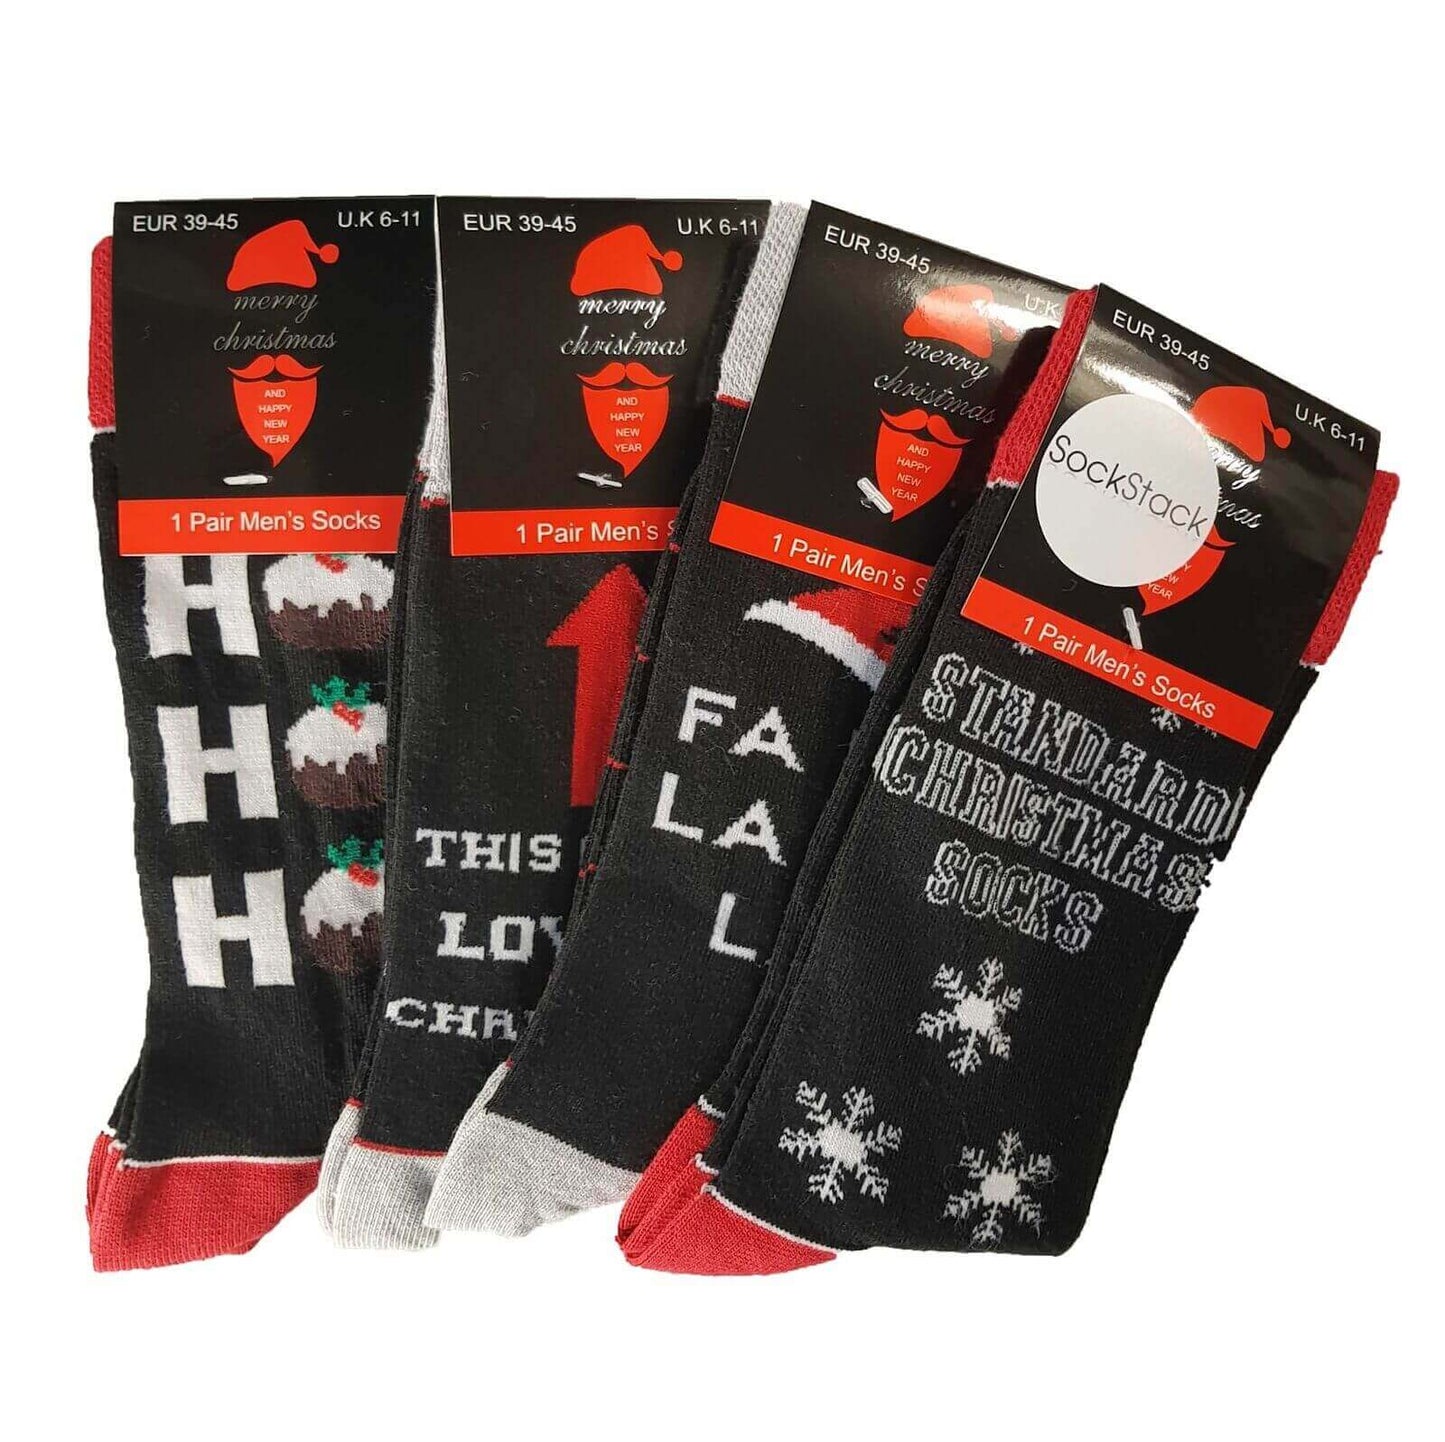 Pack Of 4 Men's Novelty Christmas Socks, Xmas Stocking Filler Gift. Buy now for £8.00. A Socks by Sock Stack. 6-11, assorted, black, boot, boys, christmas, comfortable, father christmas, festive, mens, mens socks, novelty, Out of stock, pudding, santa cla